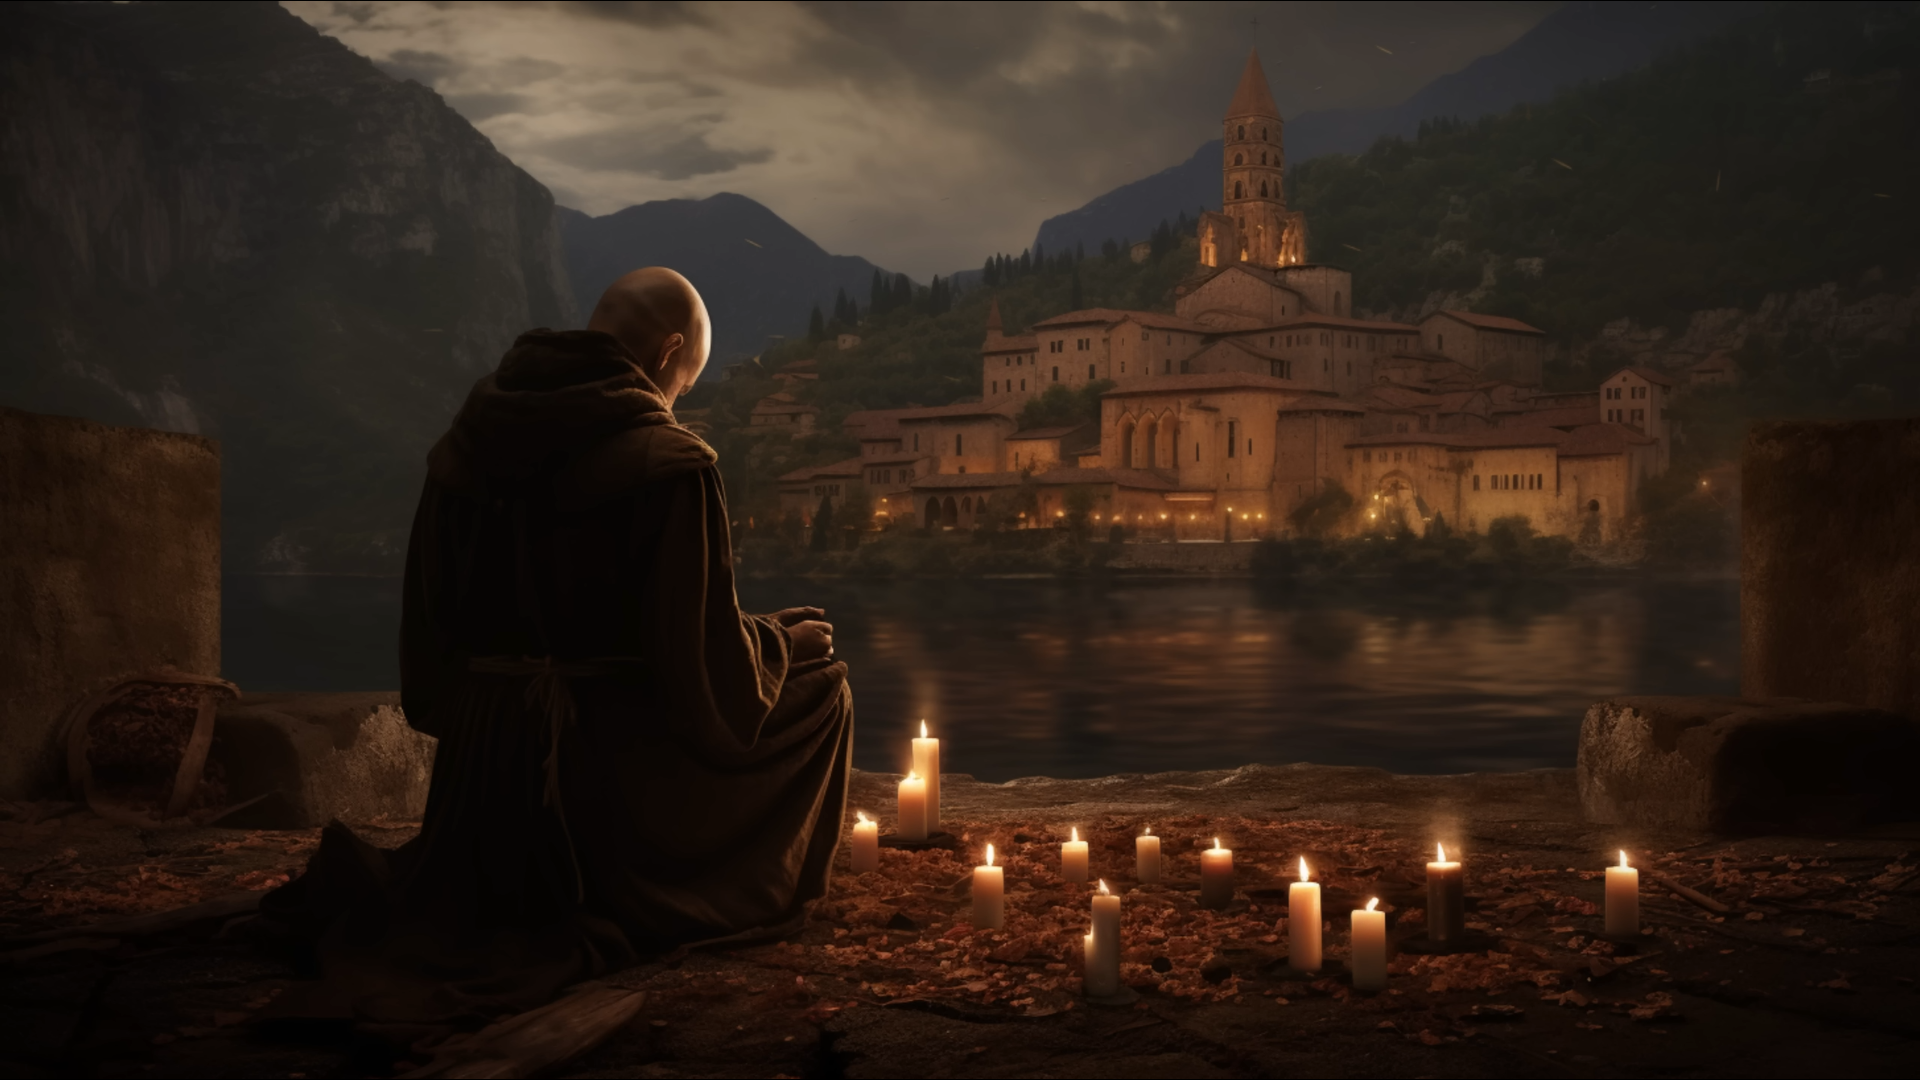 General 1920x1080 prayer lake monastery candles lights water reflection sky clouds building